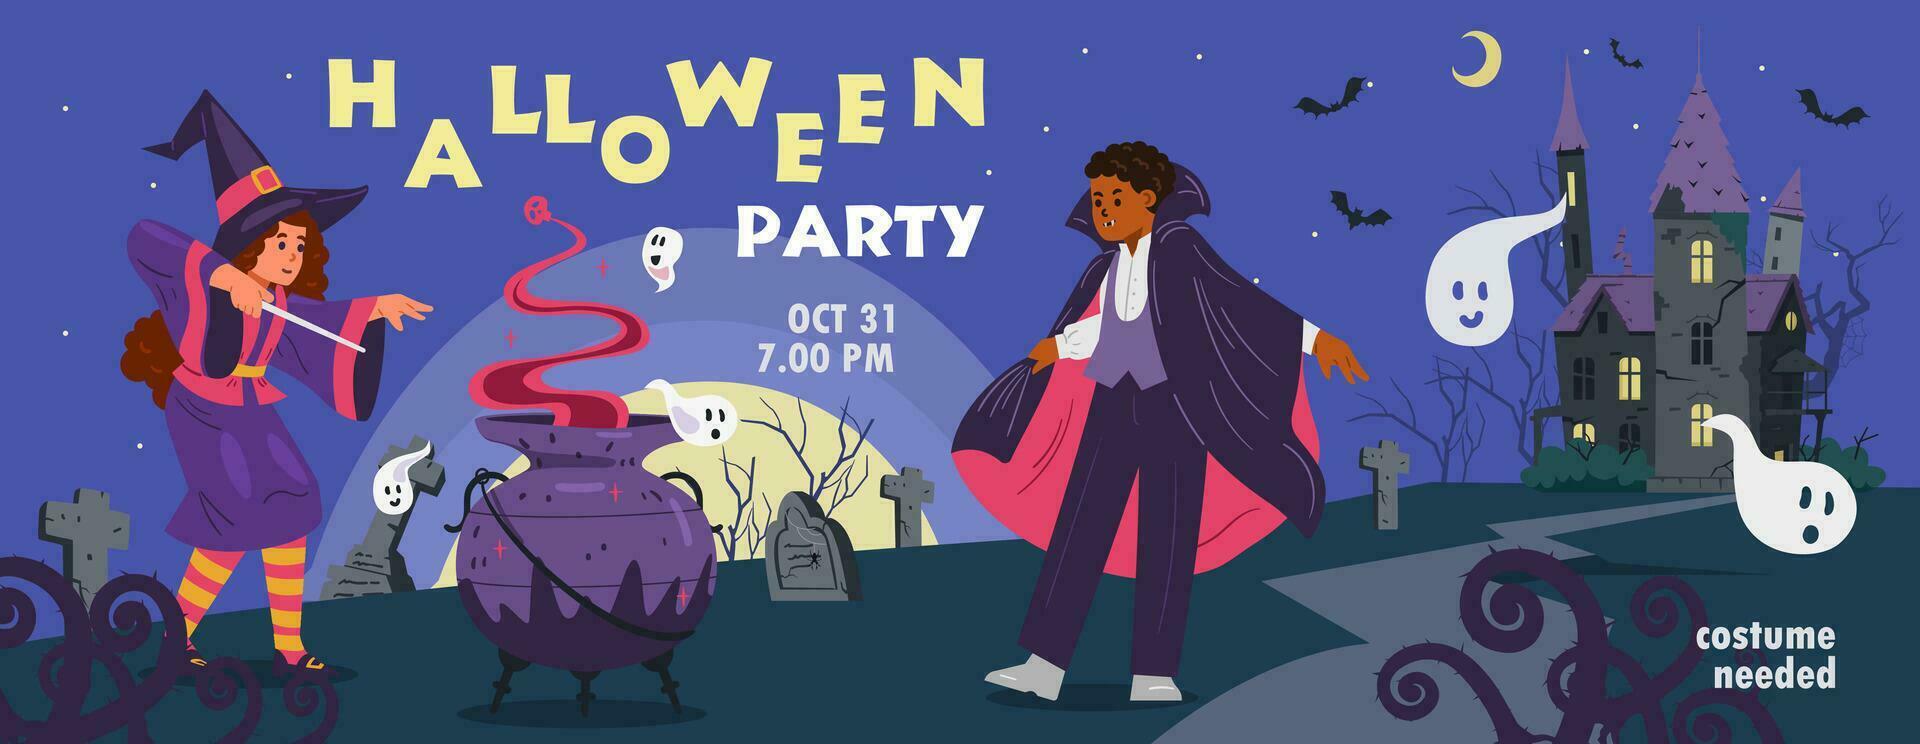 Halloween kids party invitation vector banner. Night landscape with creepy old castle and children in Halloween costumes.